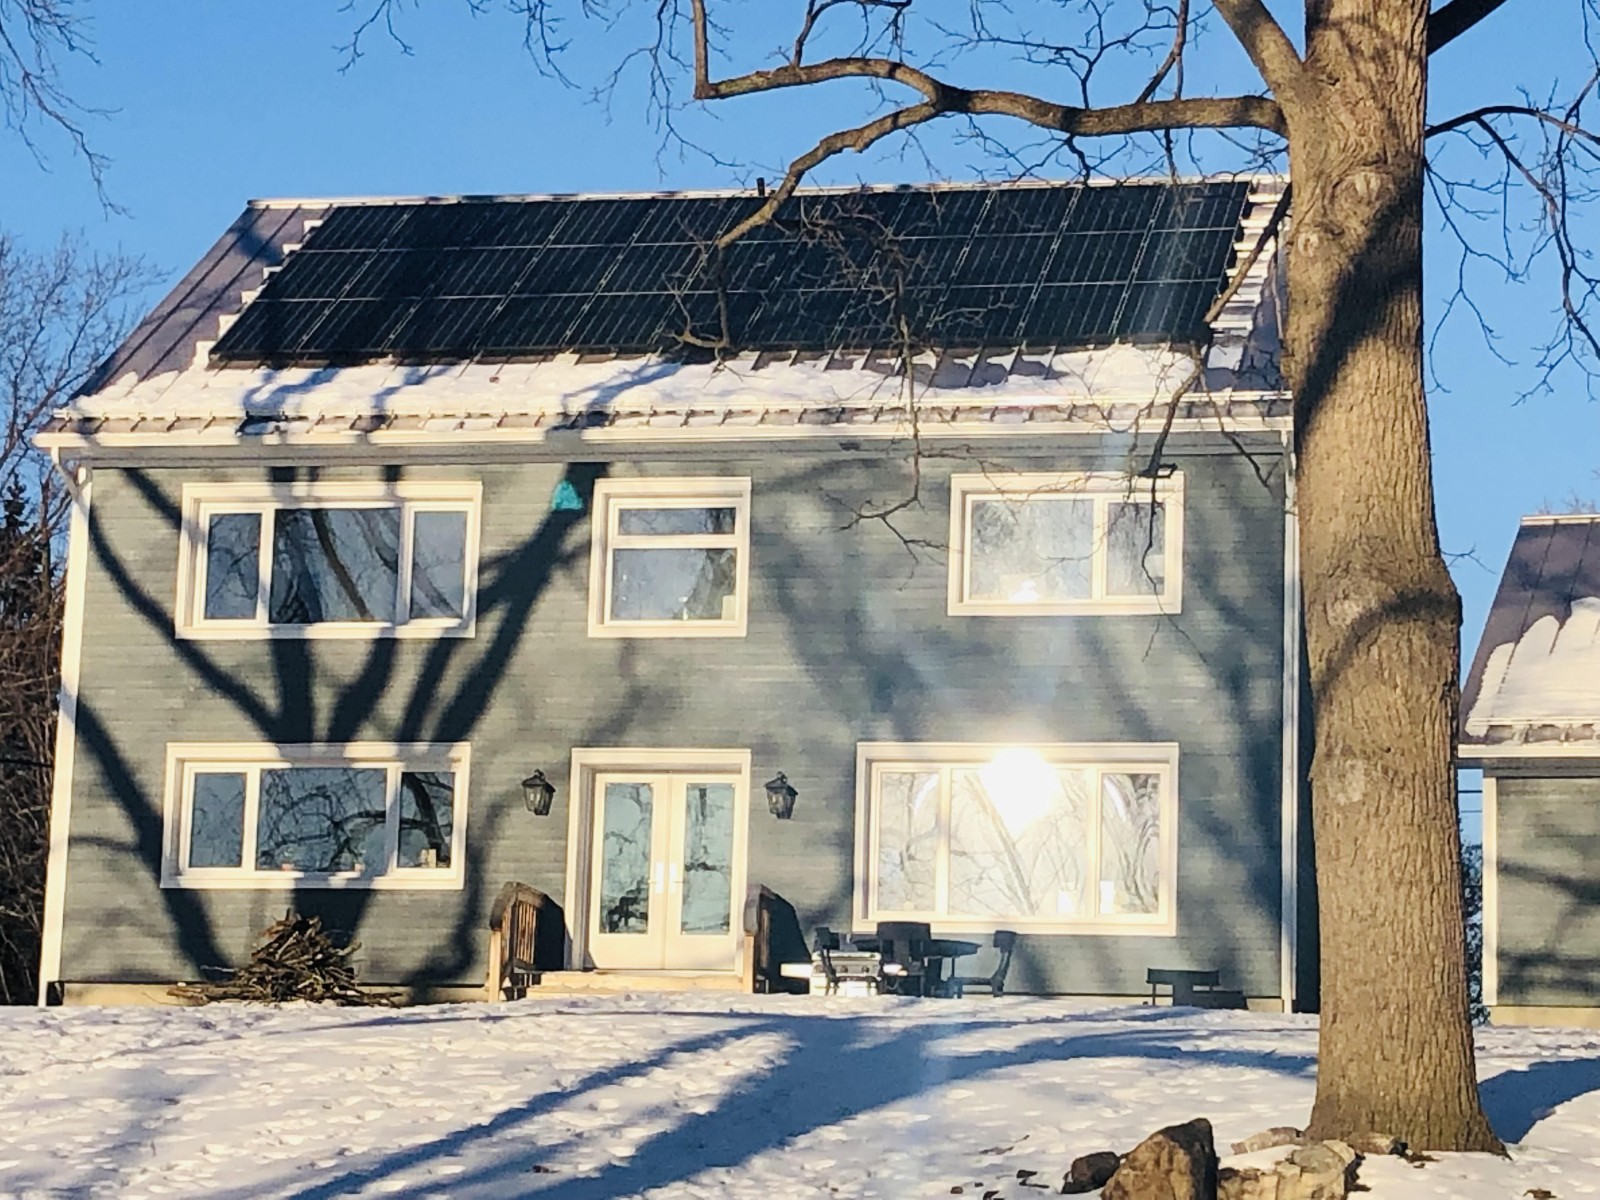 A blue house with solar panels on the roof on a sunny winter day